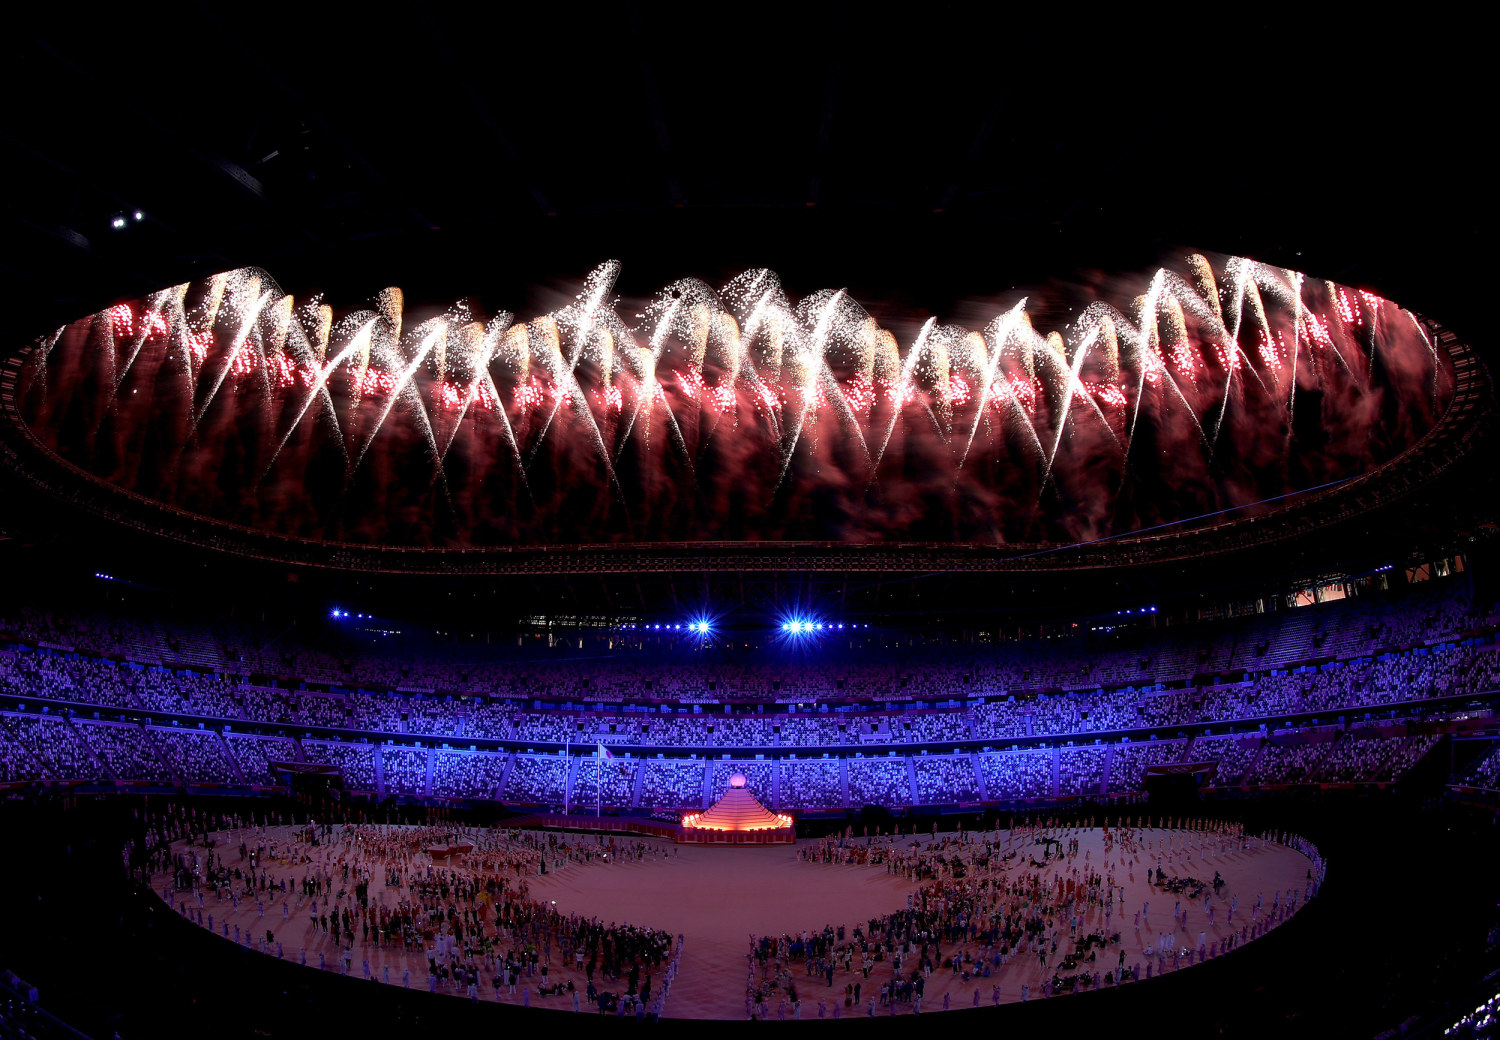 Tokyo Olympics Opening Ceremony Fashion: 11 Standout Moments to